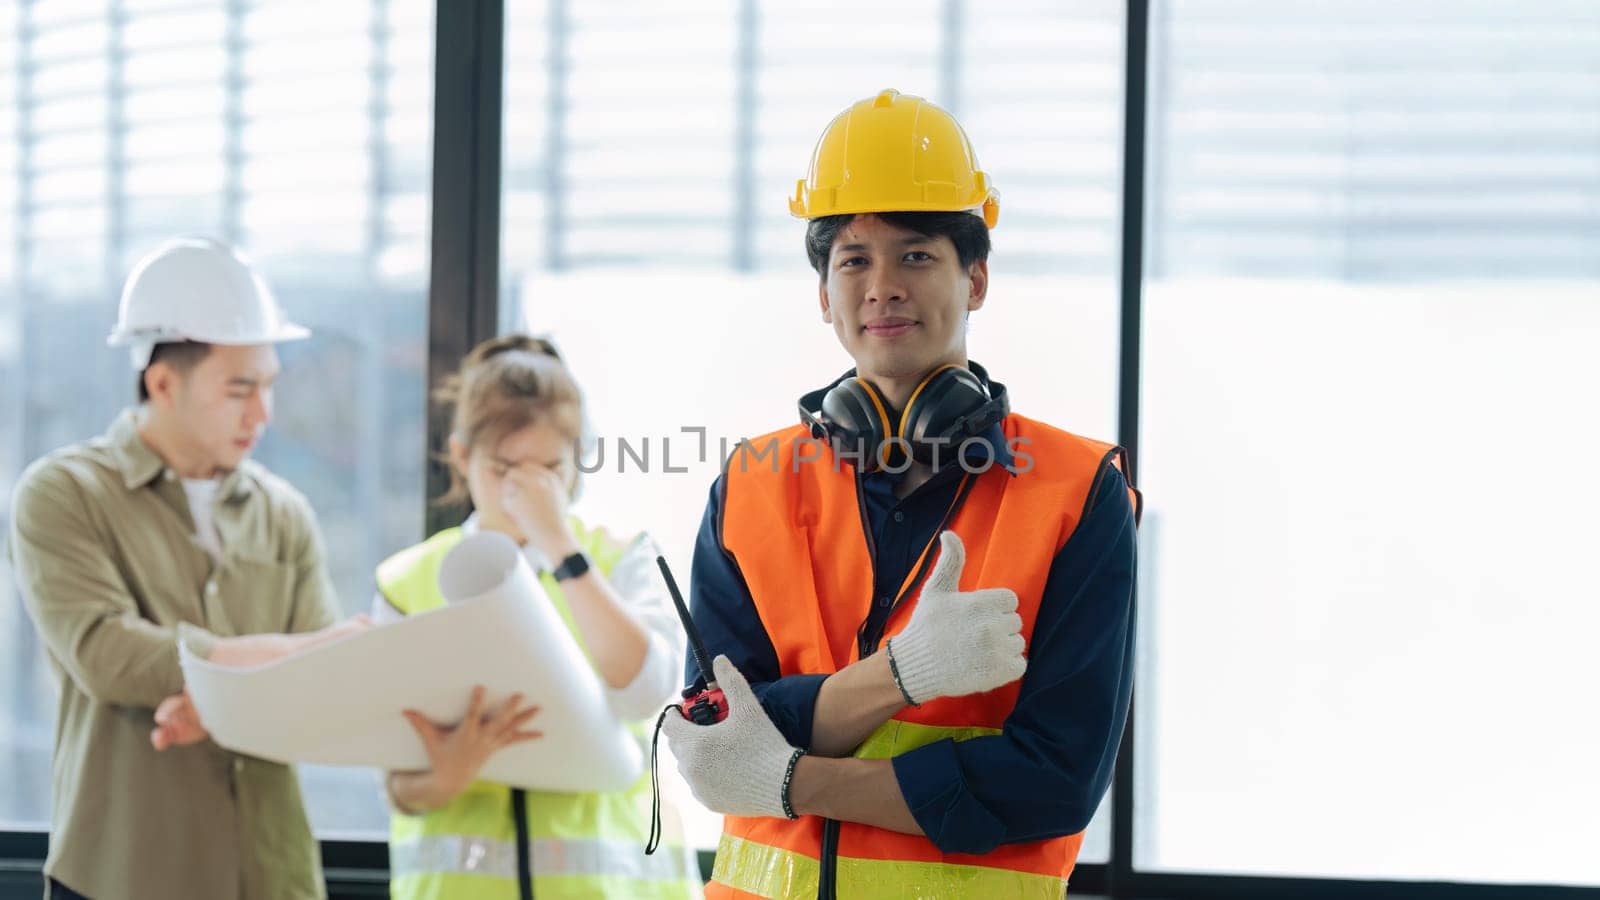 Portrait of civil engineer with hard hat holding radio walkie talkie while civil engineer planning in background by itchaznong